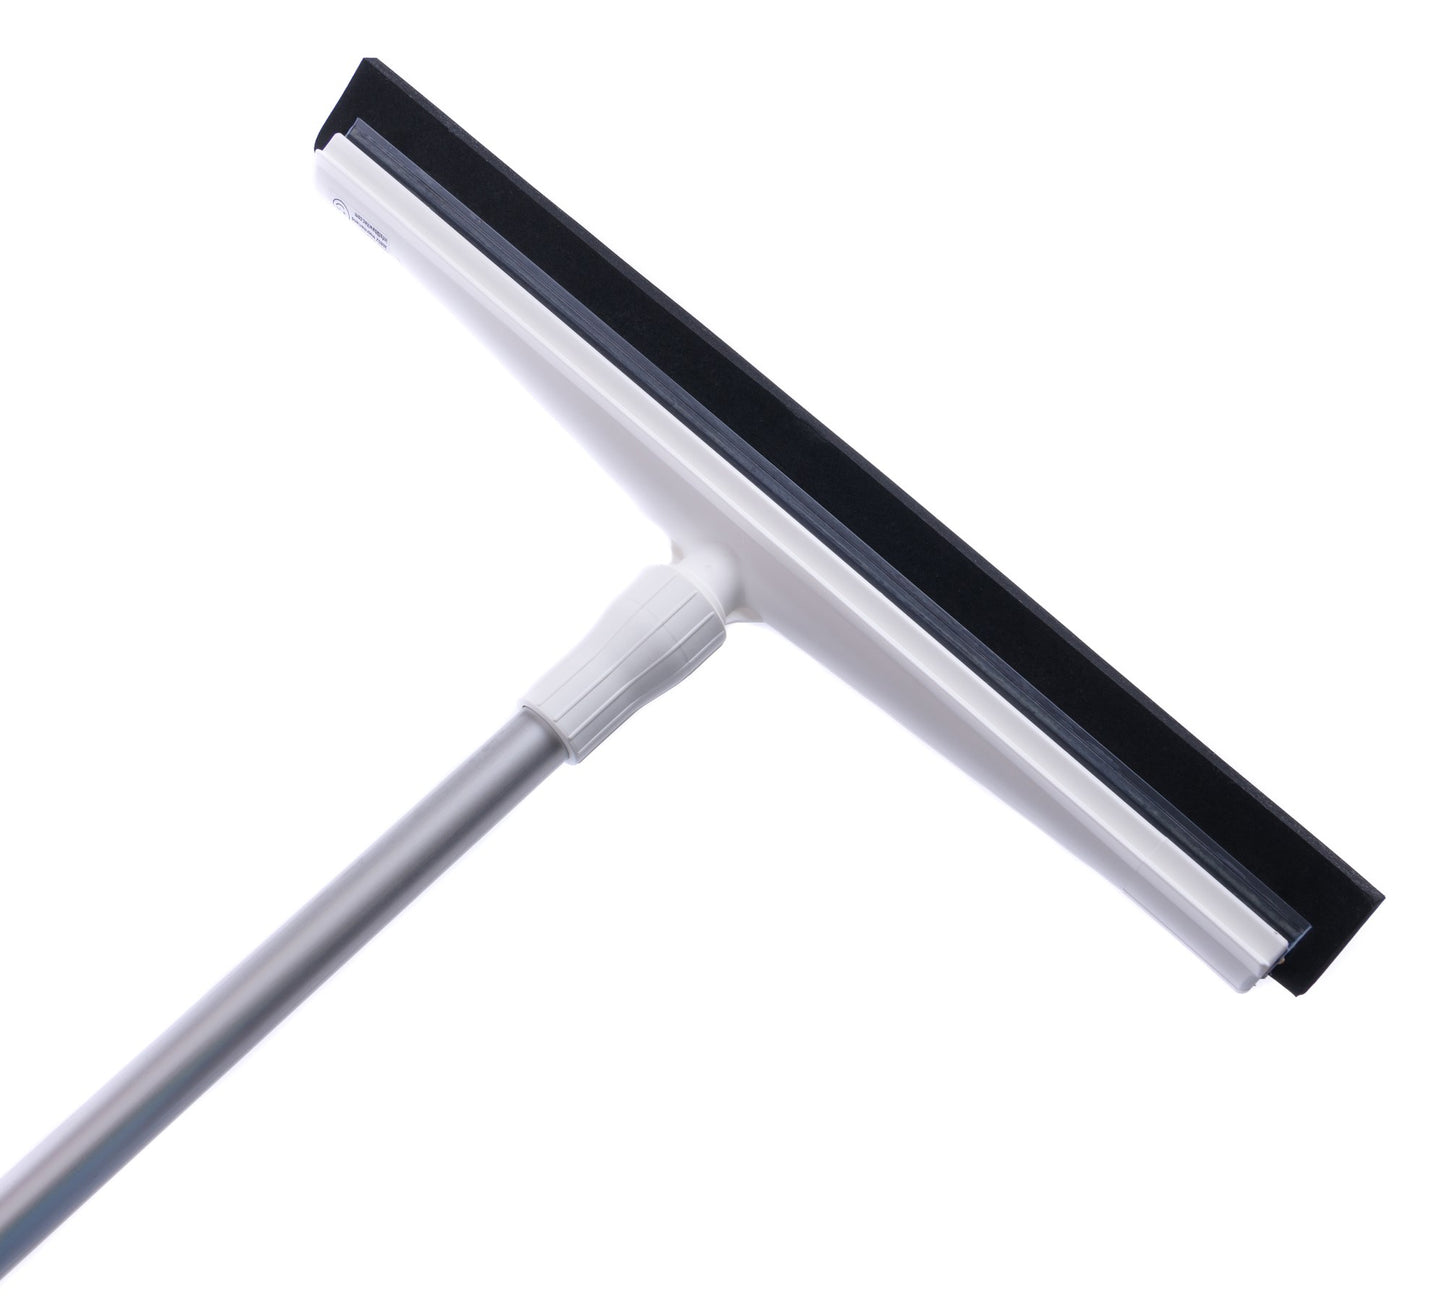 Professional hygiene water squeegee water squeegee with handle aluminum handle according to HACCP white or blue with black rubber lip 